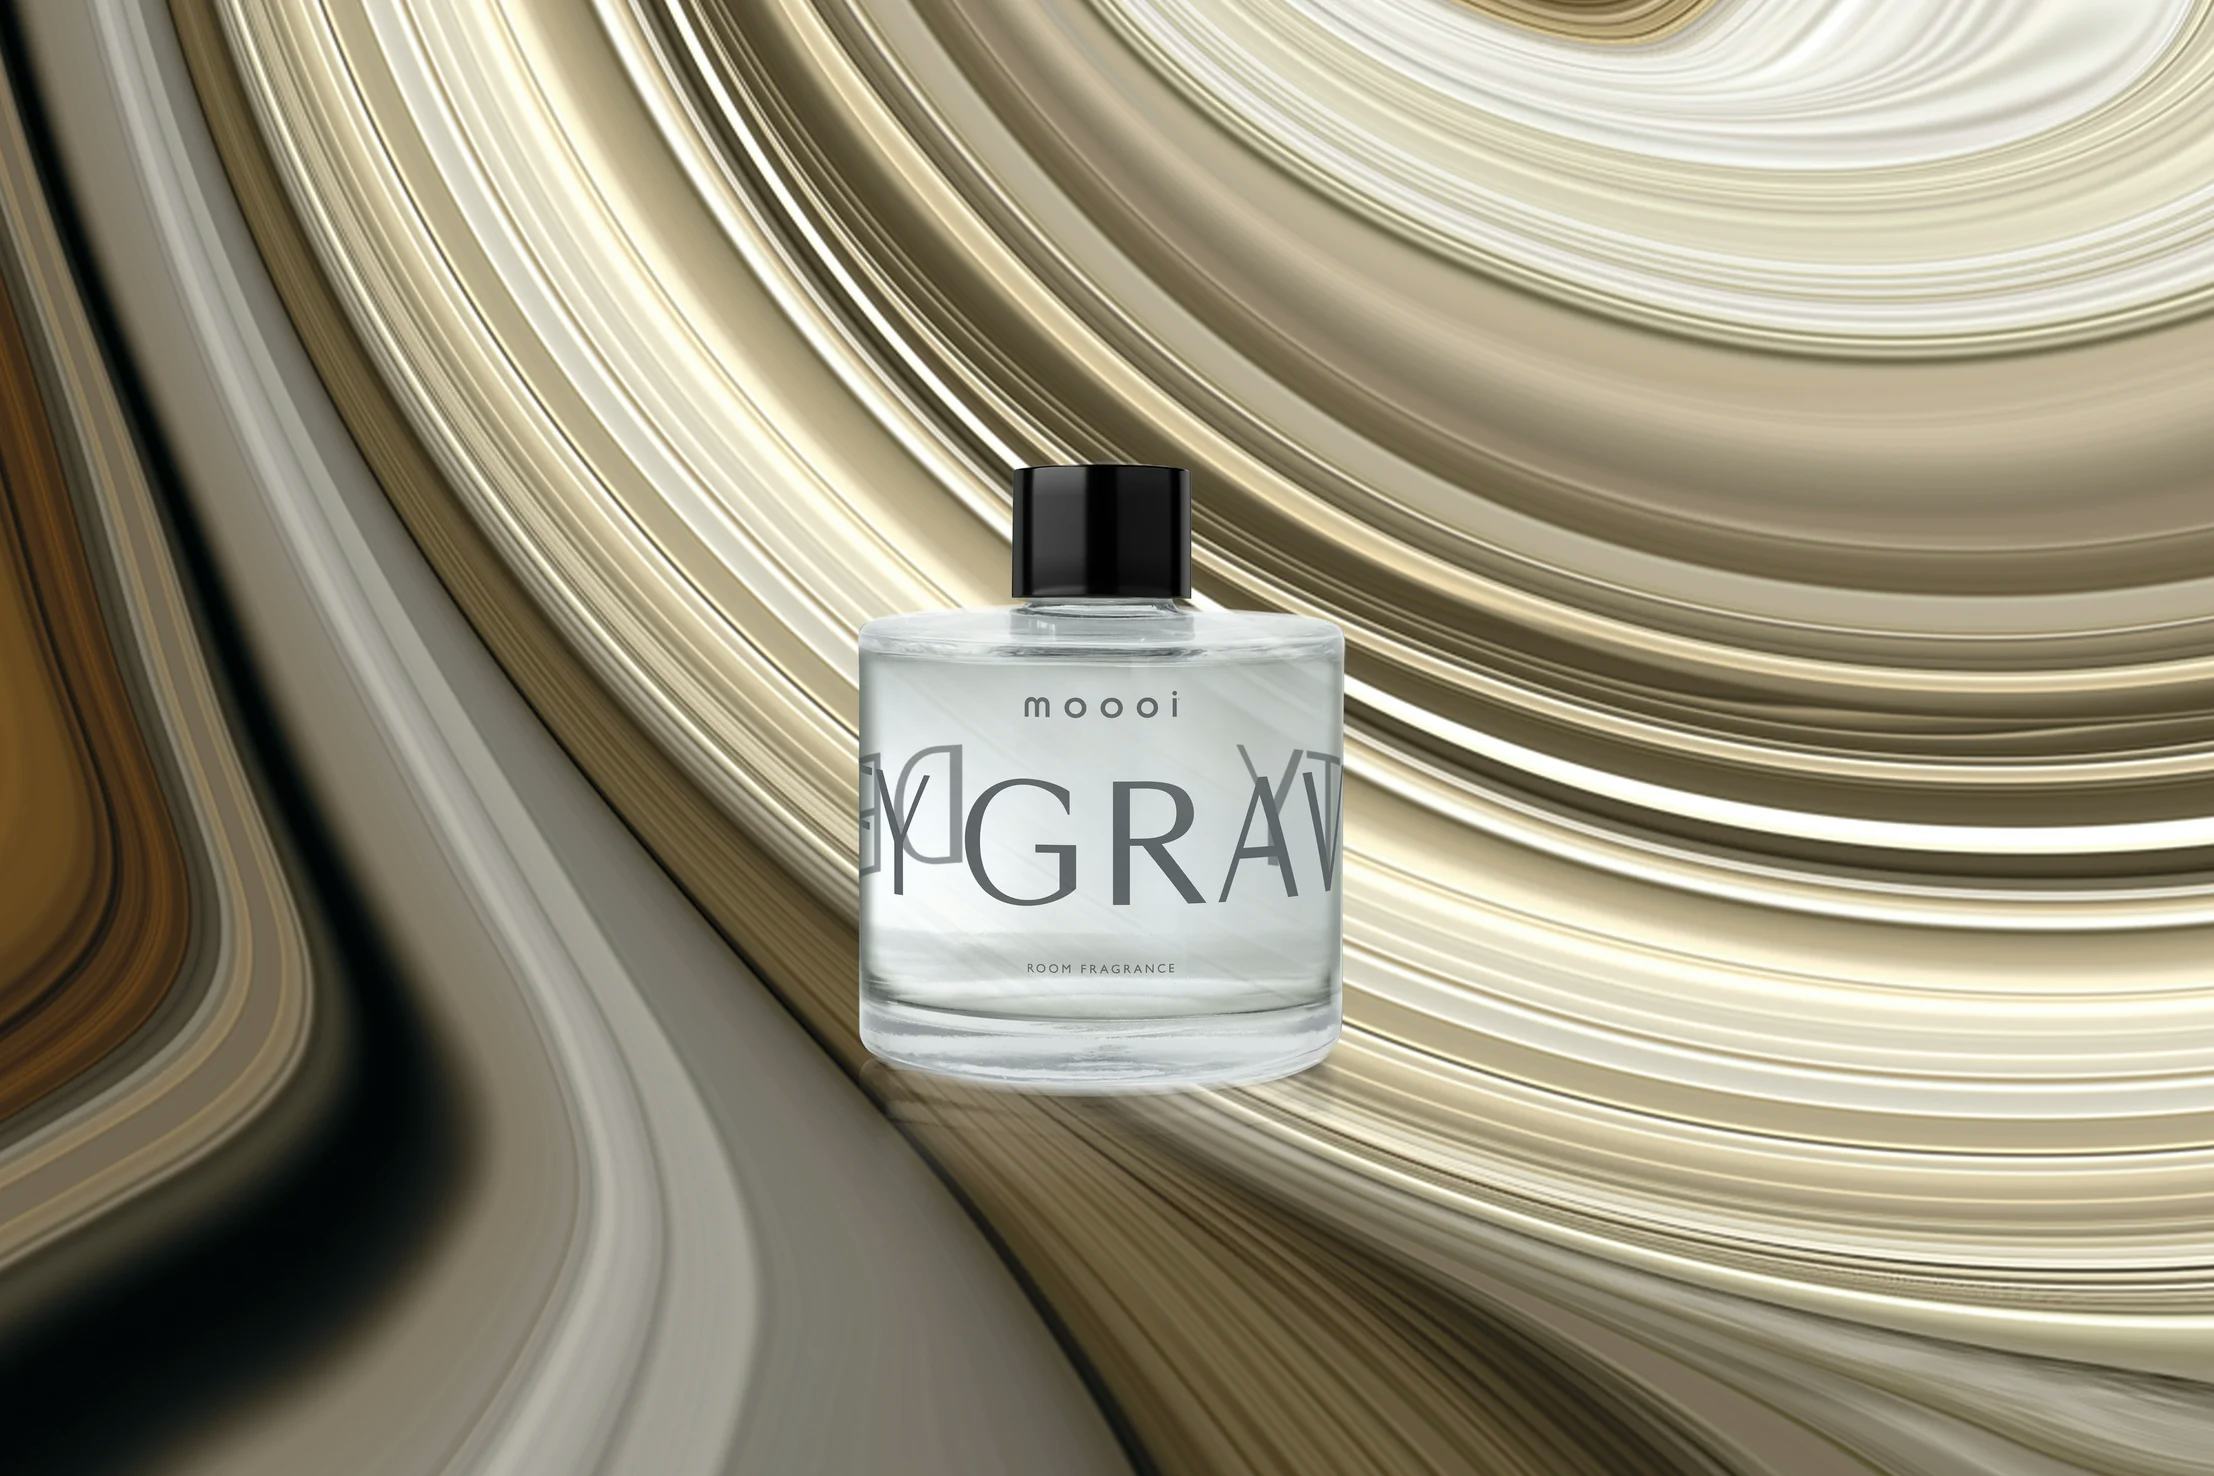 Room Fragrance Defy Gravity bottle with graphic brown background